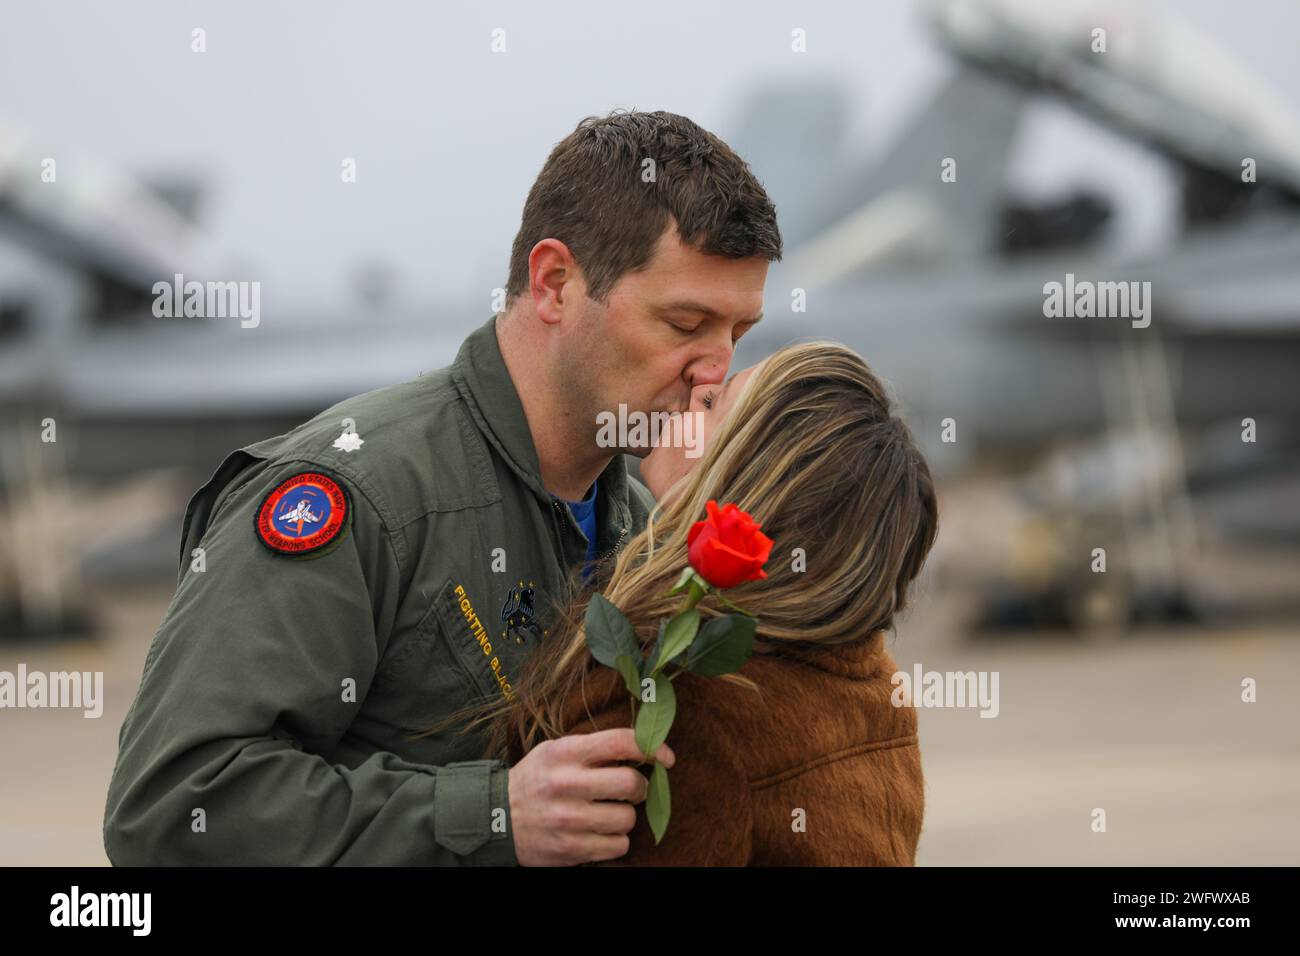 240115-N-YM590-1110 VIRGINIA BEACH, Va. (Jan. 15, 2024)- A pilot, assigned to the “Fighting Blacklions” of Strike Fighter Squadron (VFA) 213, reunites with his family after returning to Naval Air Station Oceana in Virginia, Jan. 15, following a more than eight-month deployment with the Gerald R. Ford Carrier Strike Group. While deployed, the squadron accomplished 1,943 sorties covering 3,137 flight hours with a 97% sortie completion rate. Stock Photo